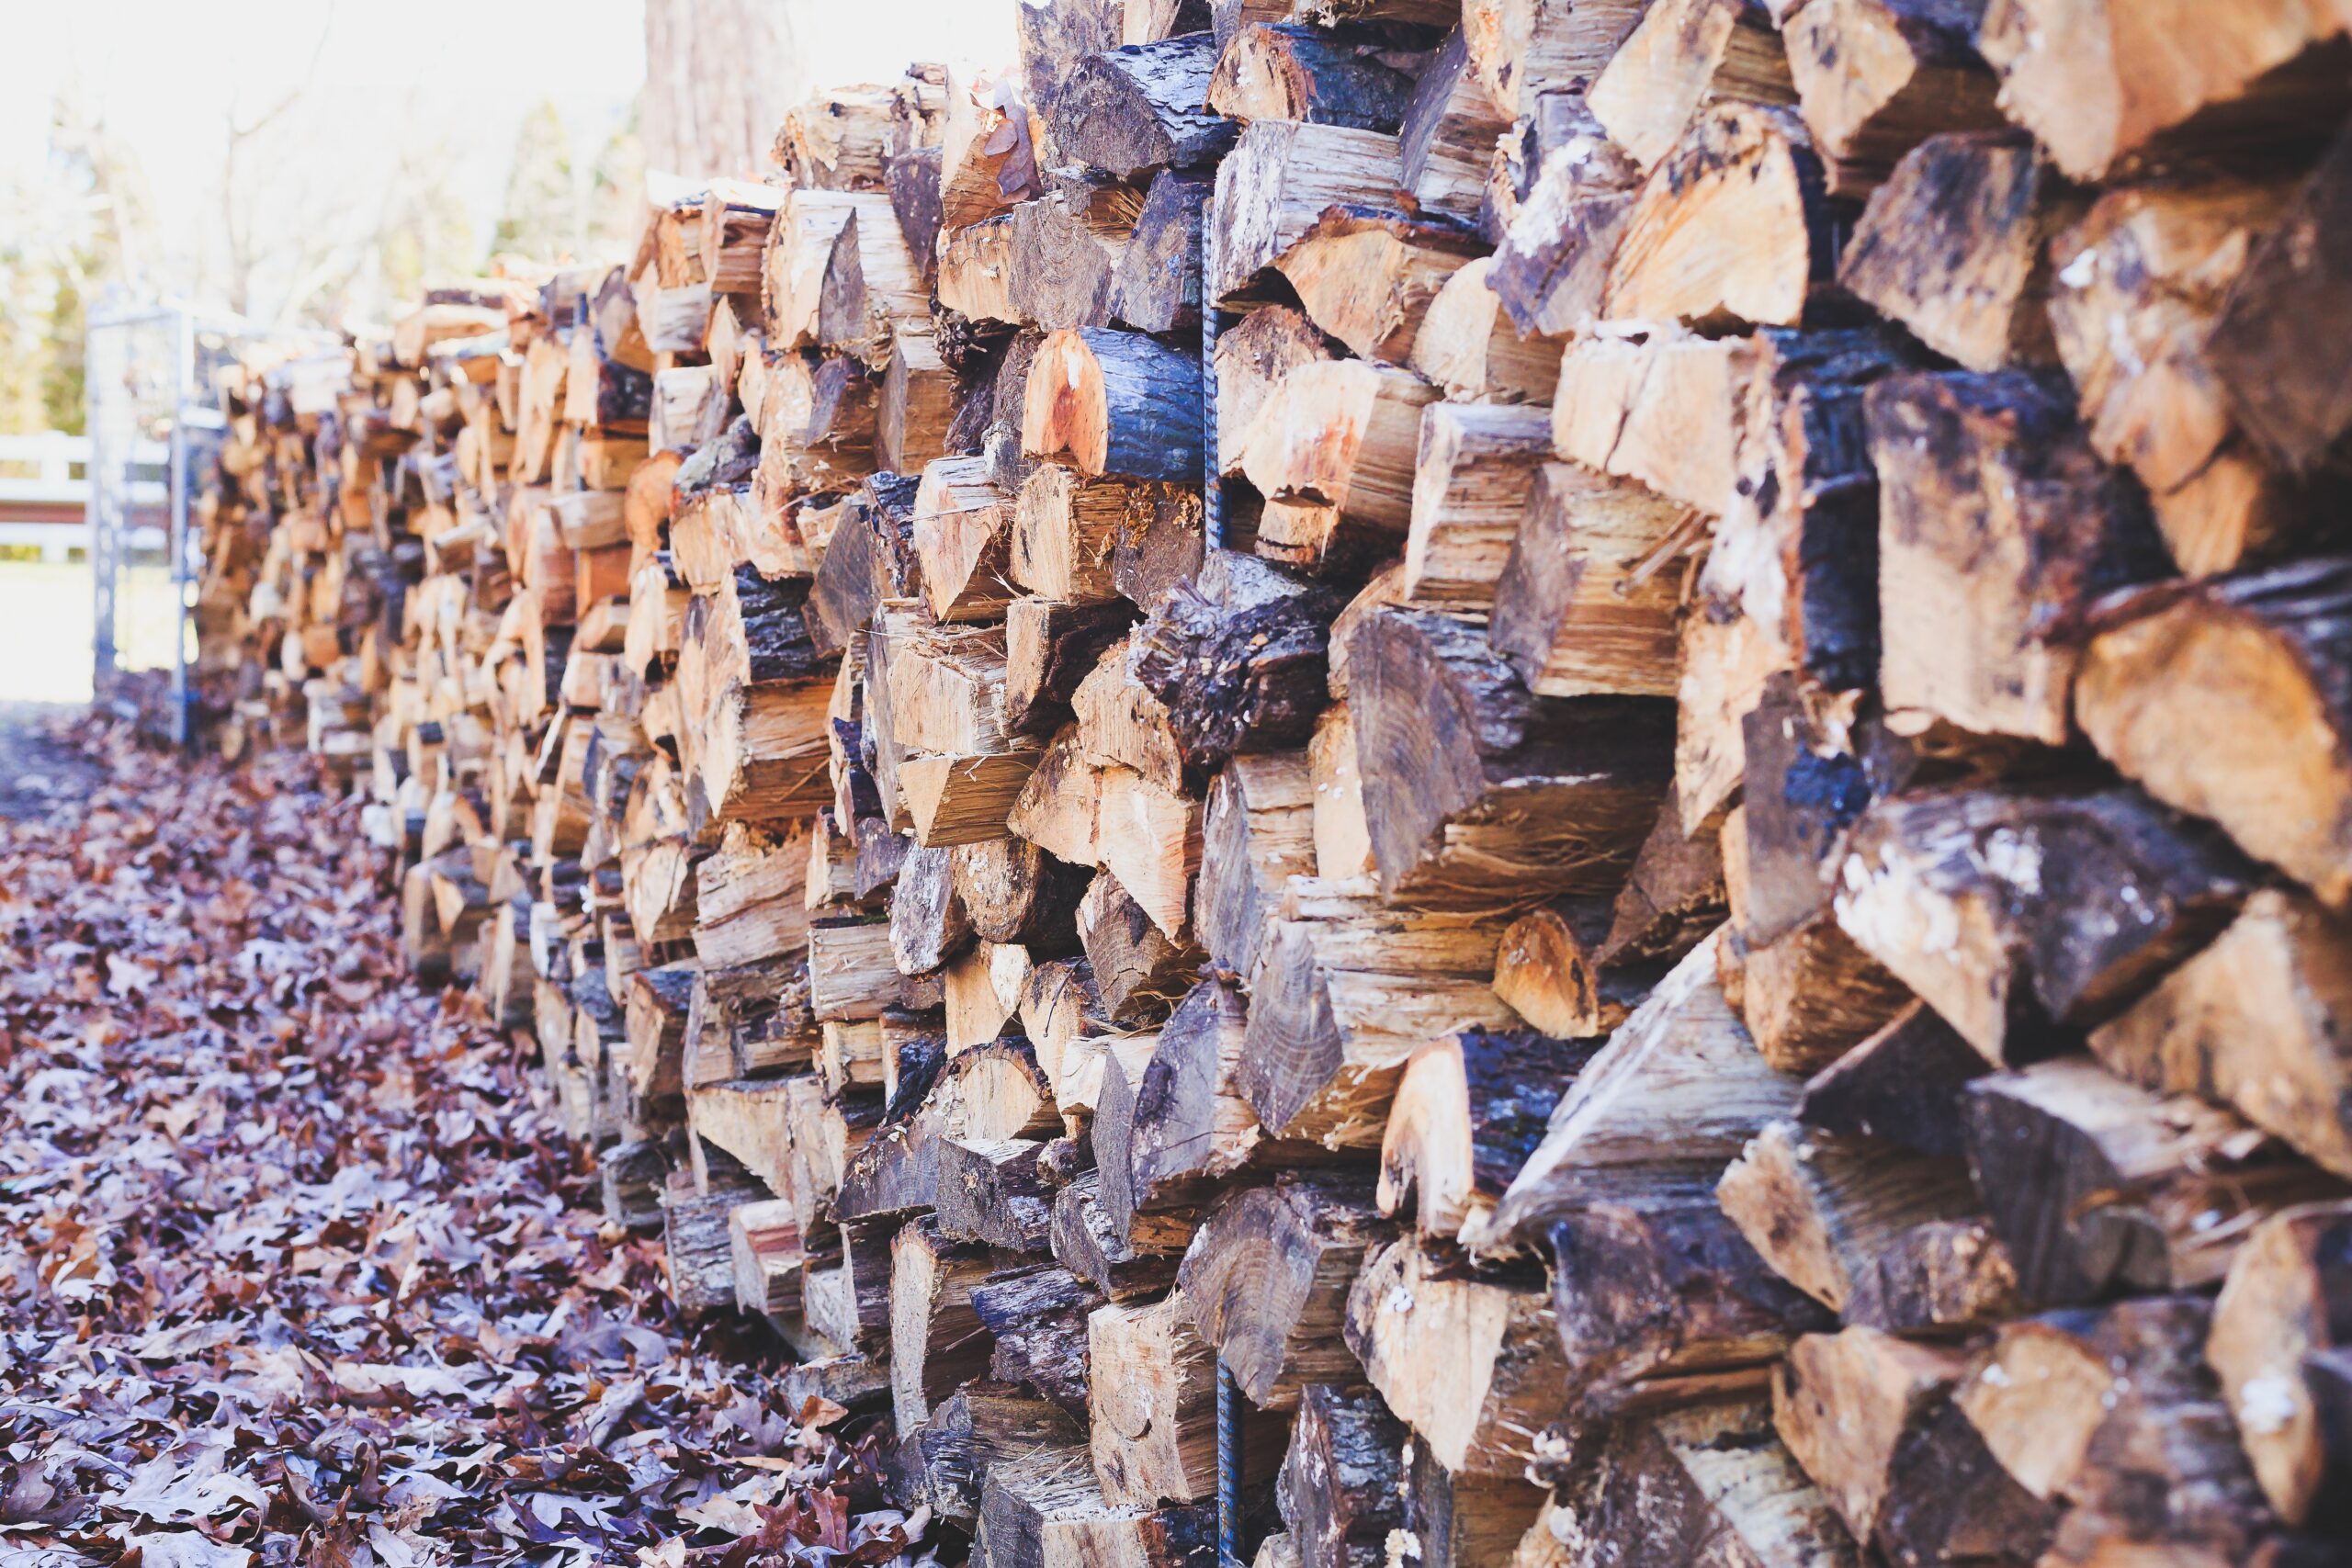 Wood pile - Wood Products Extension NC State University